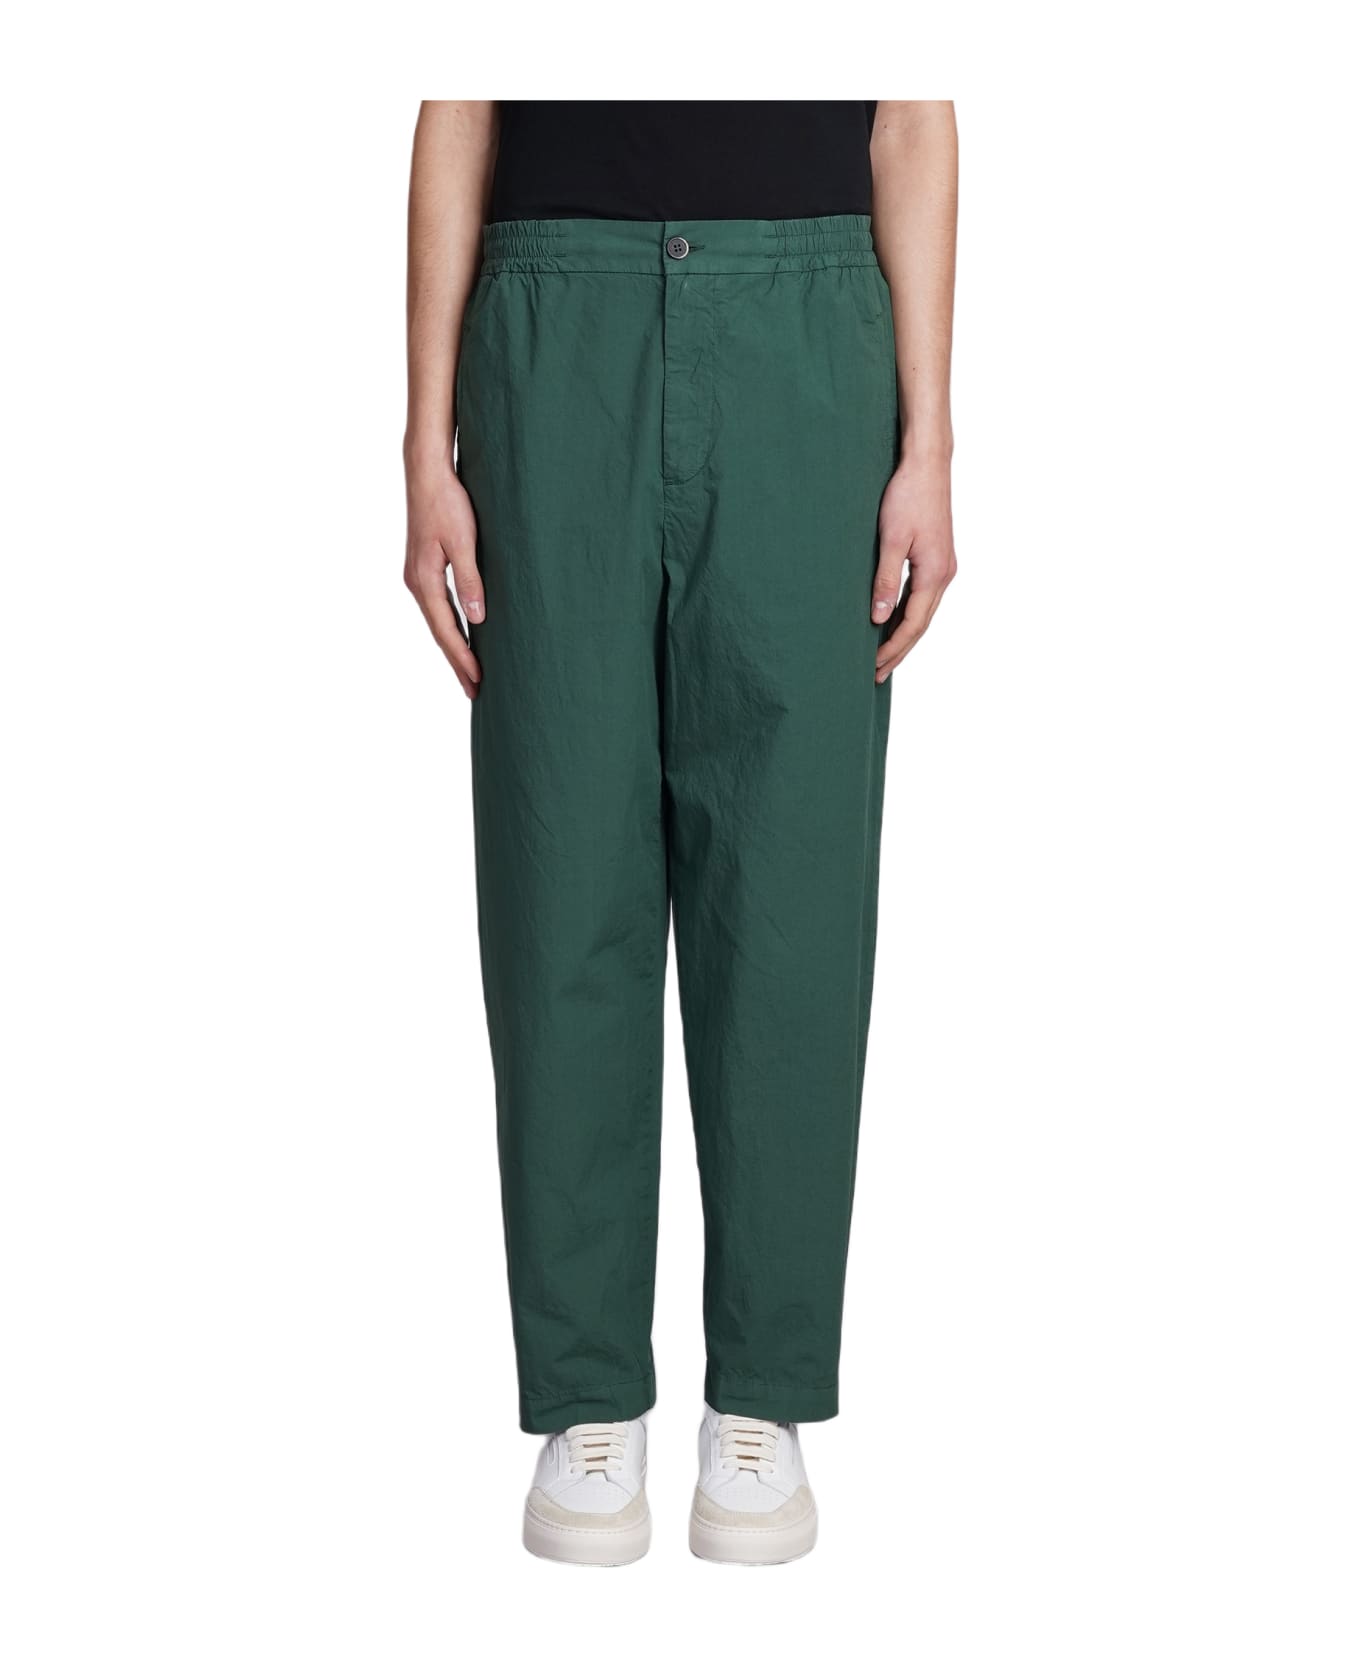 Barena Ameo Pants In Green Cotton - green ボトムス